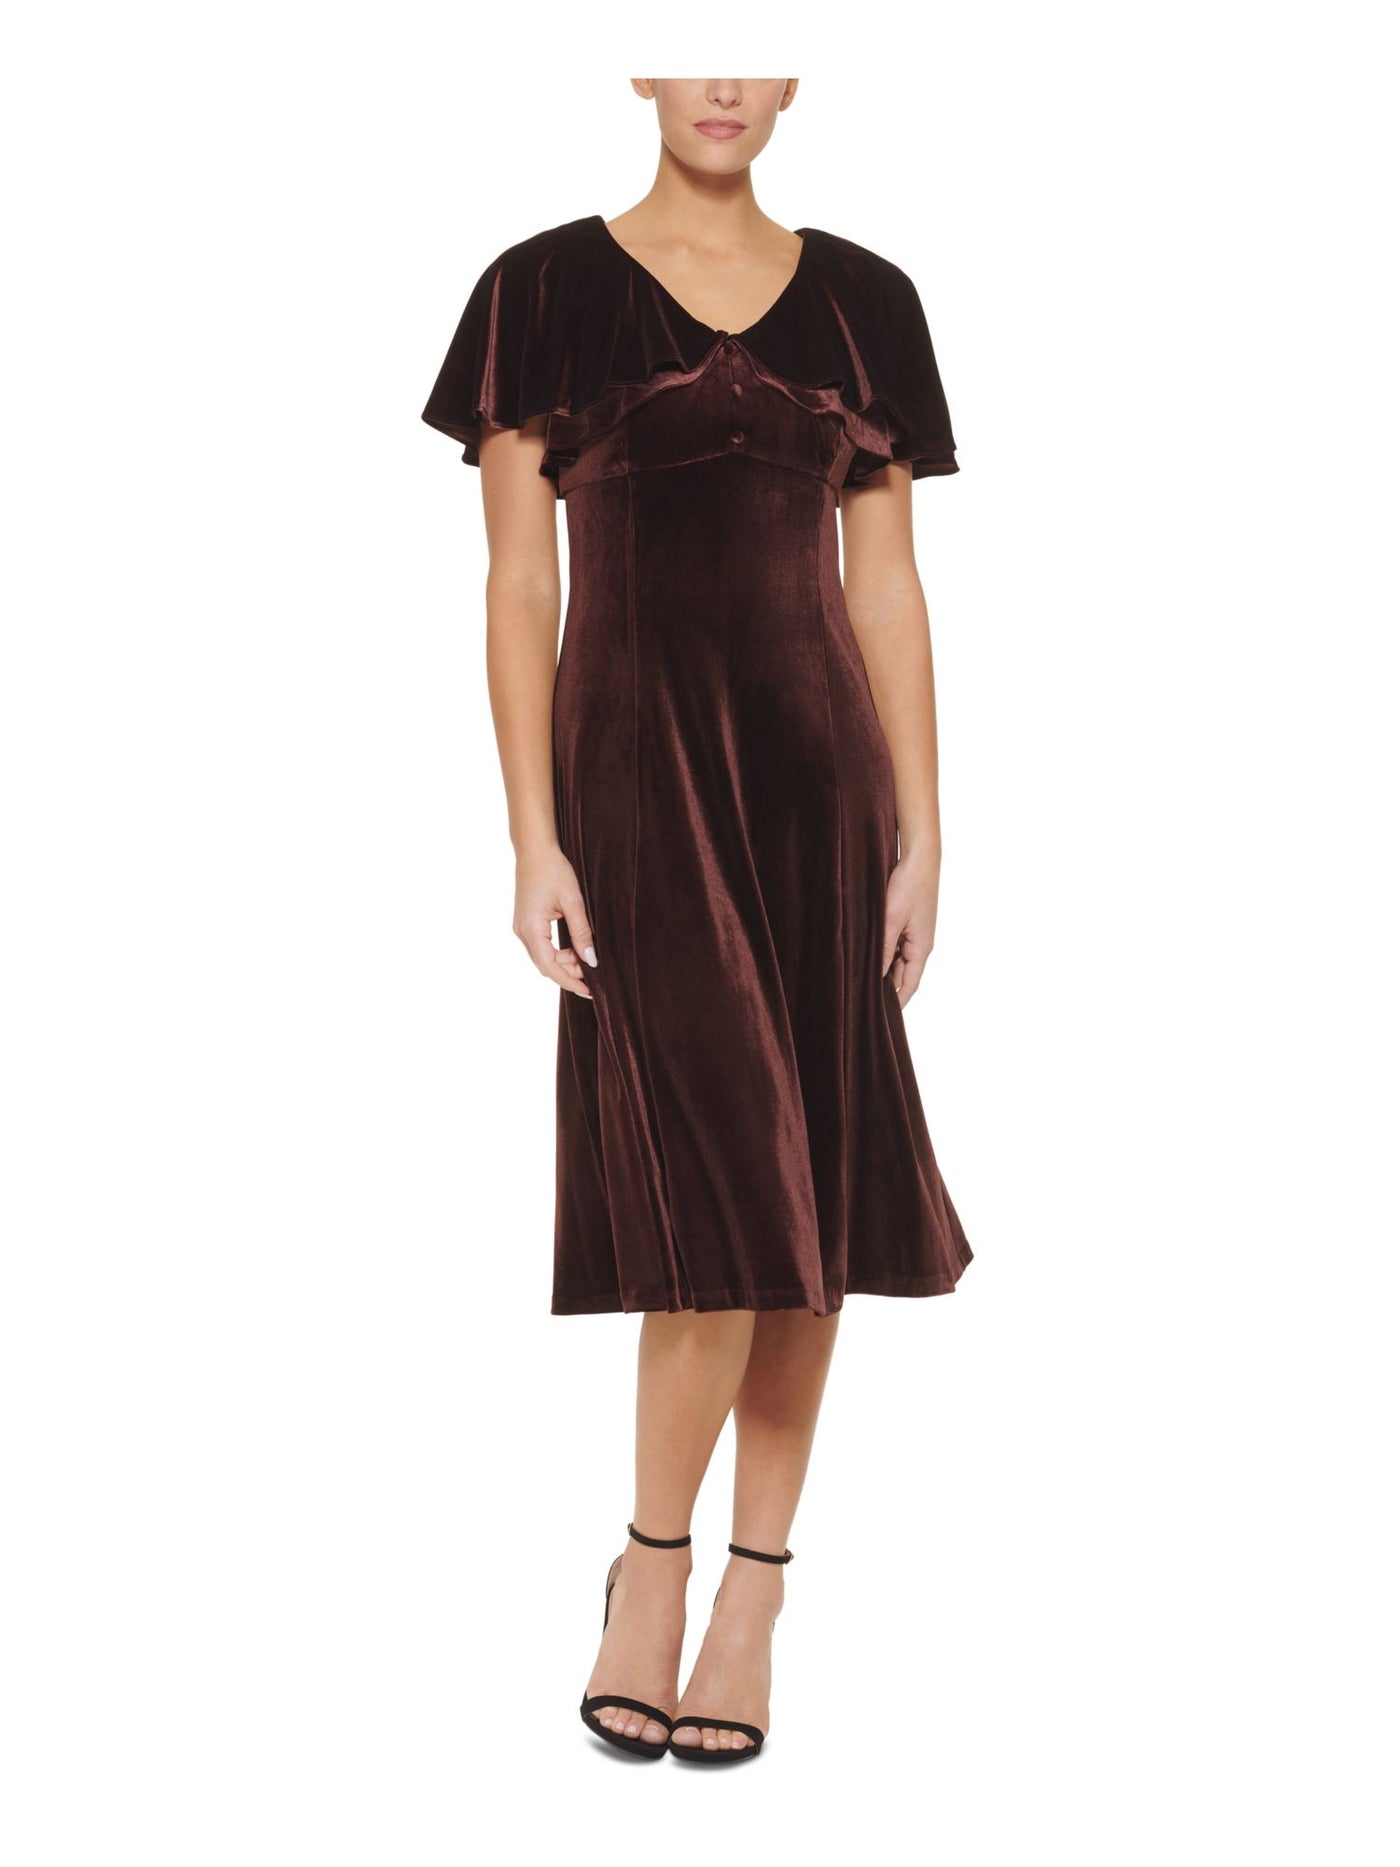 DKNY Womens Brown Zippered Unlined Cape Silhouette Sleeveless V Neck Midi Cocktail Shift Dress 10